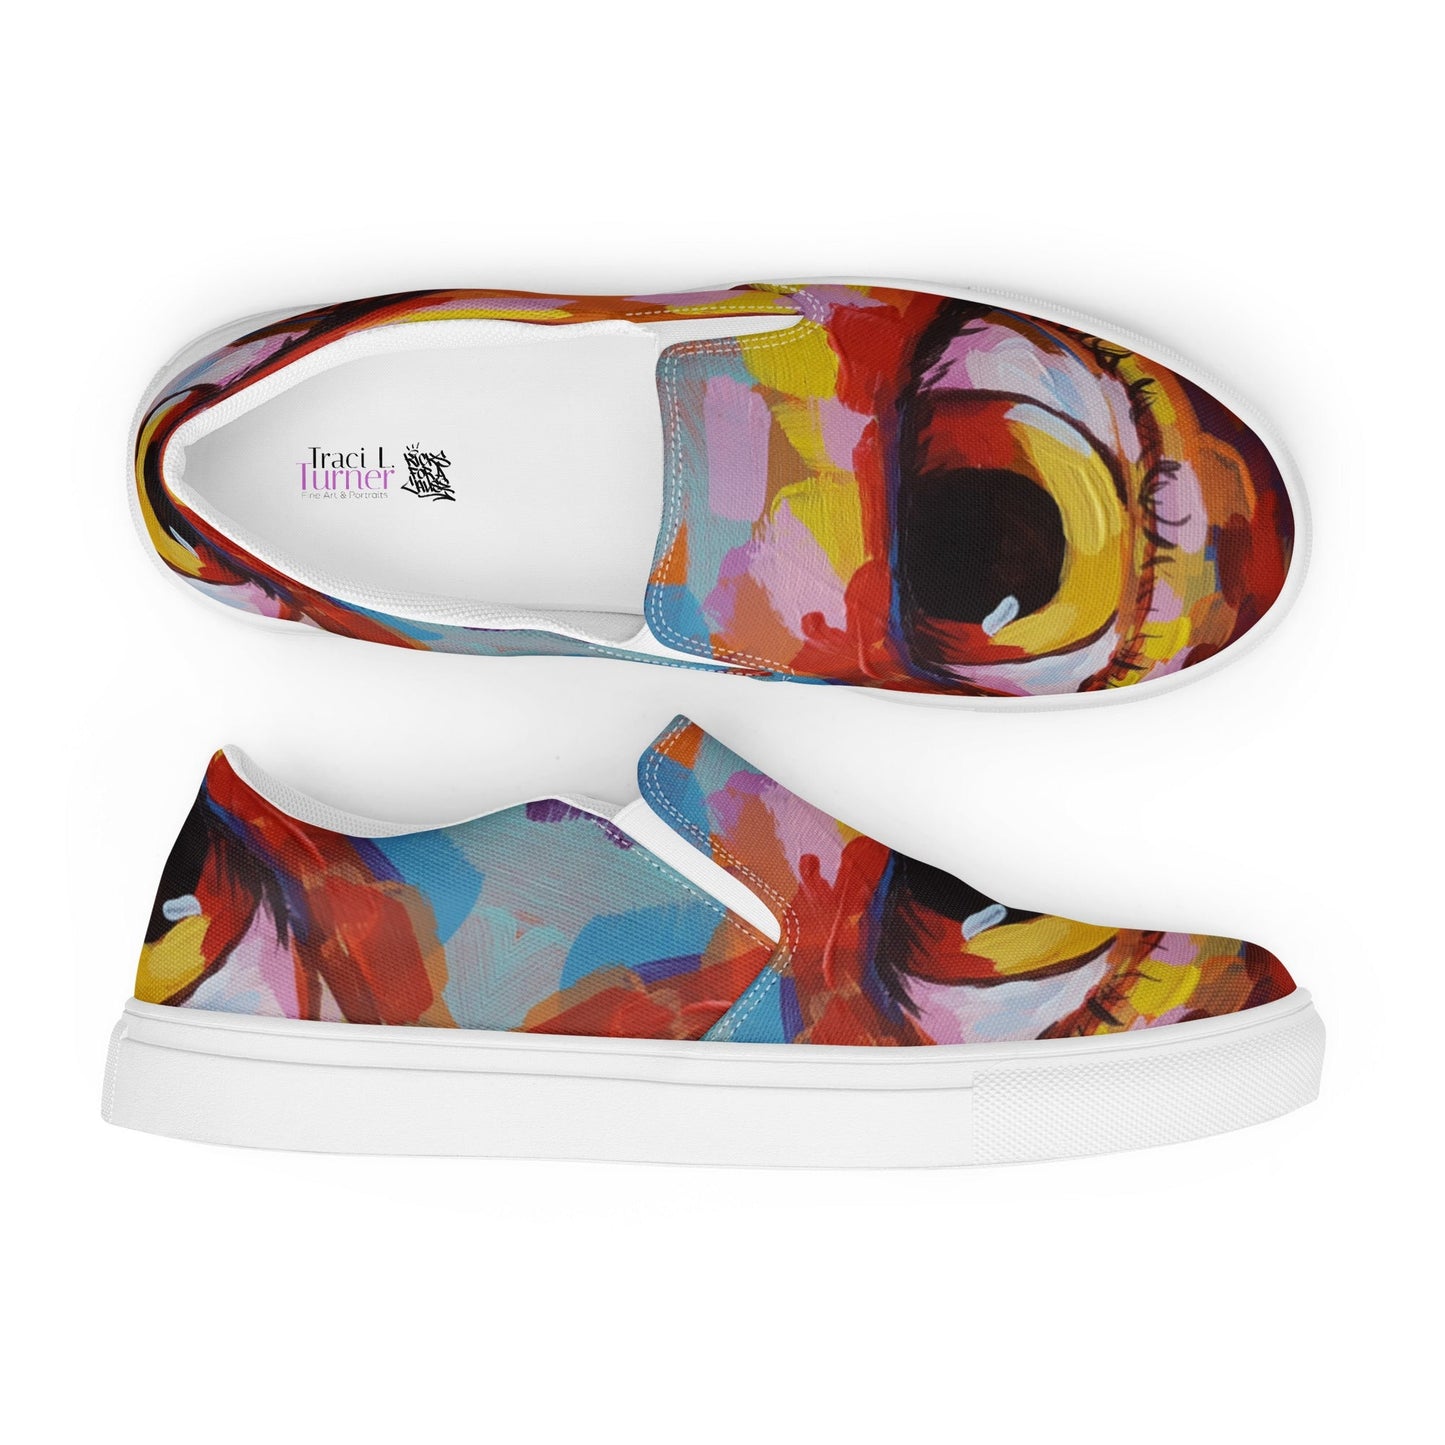 Hot/Cold Eye by Traci L Turner - Kicks for a Cause